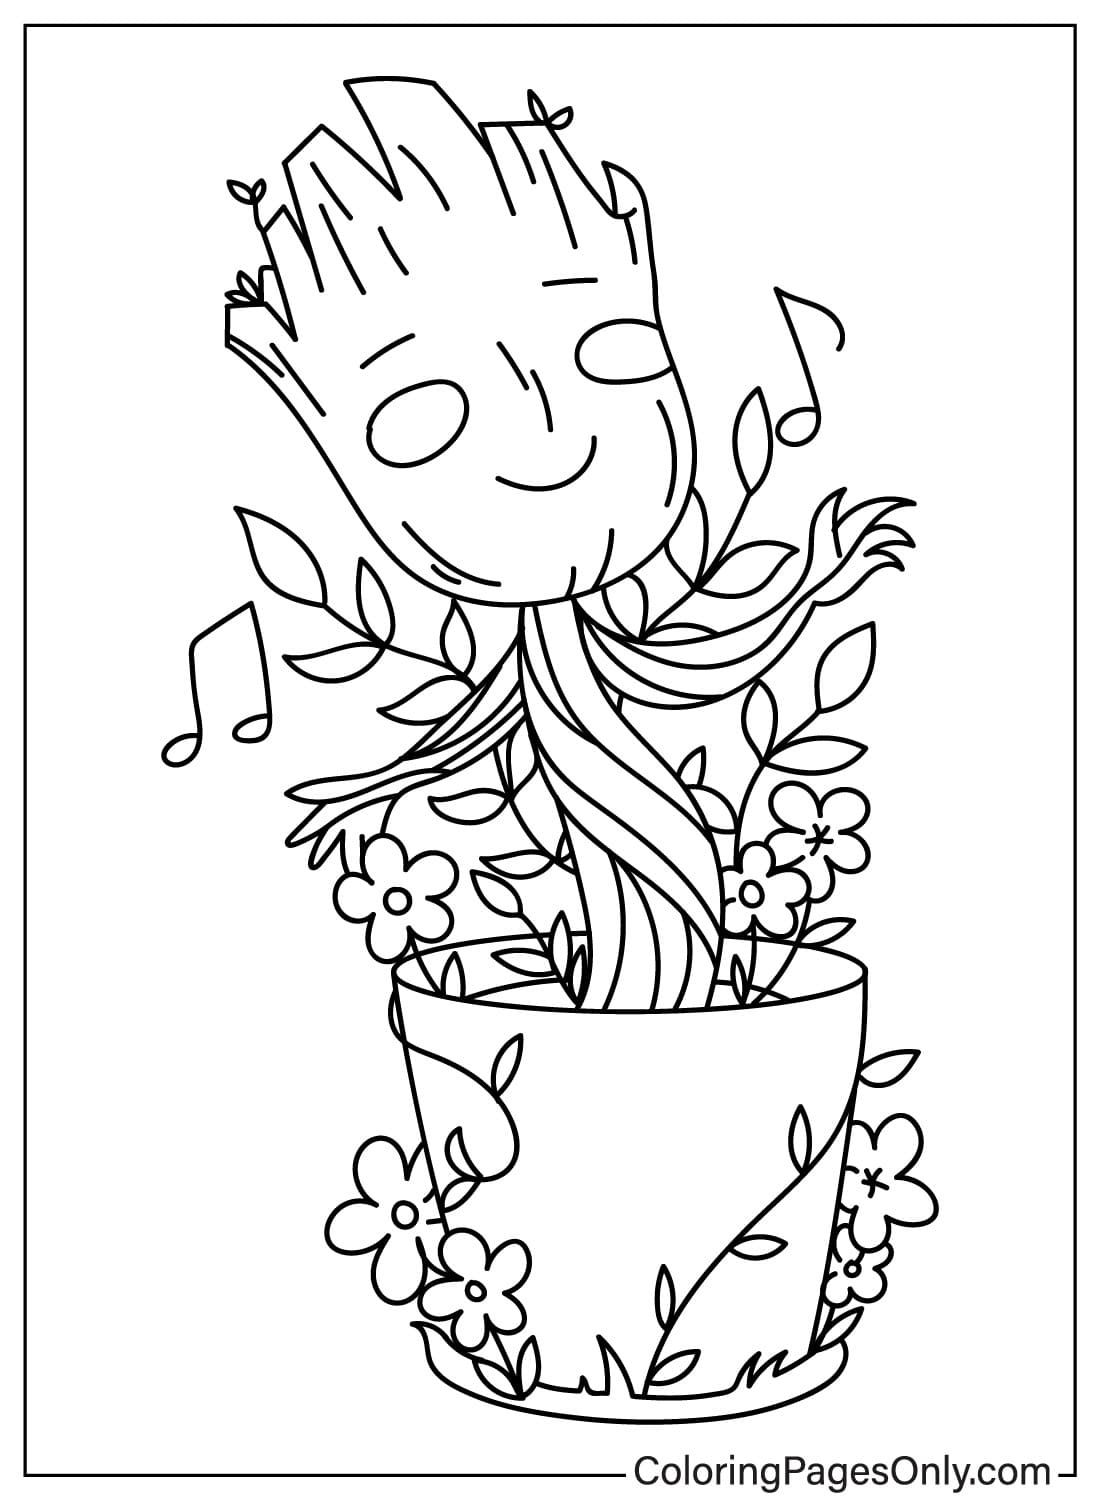 Groot and Flower Coloring Page from Groot